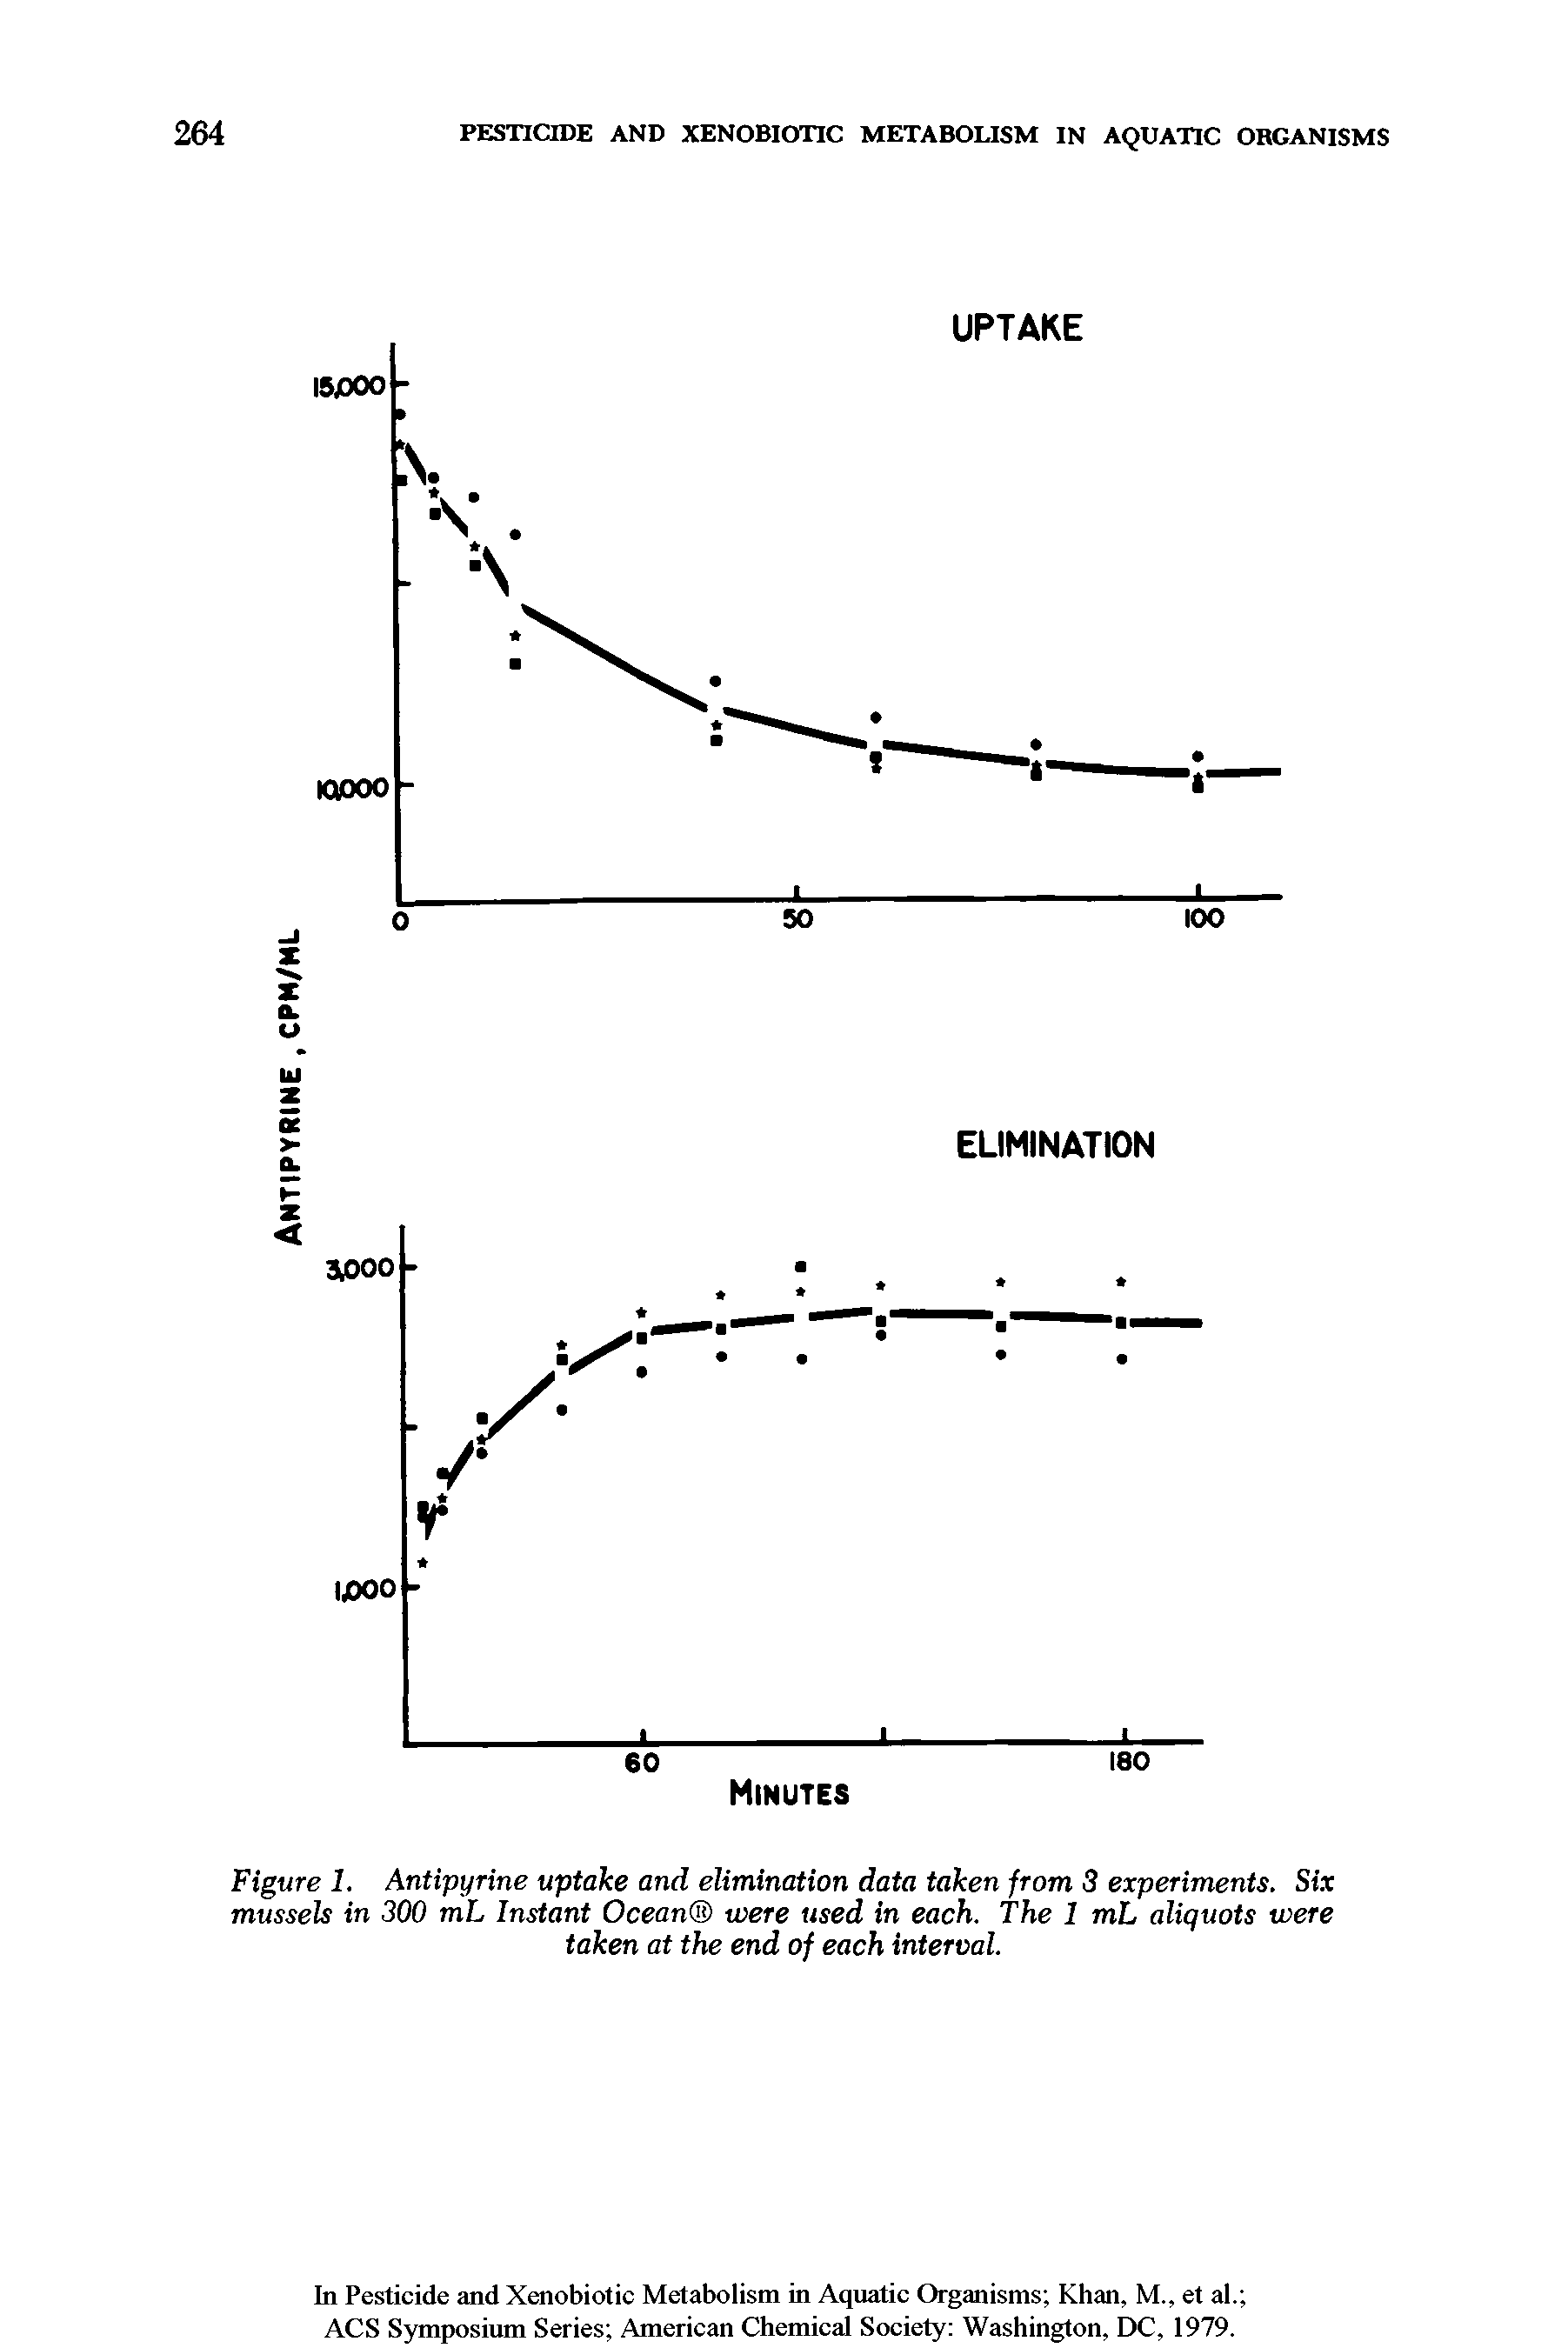 Figure 1. Antipyrine uptake and elimination data taken from 3 experiments. Six mussels in 300 mL Instant Ocean were used in each. The 1 mL aliquots were taken at the end of each interval.